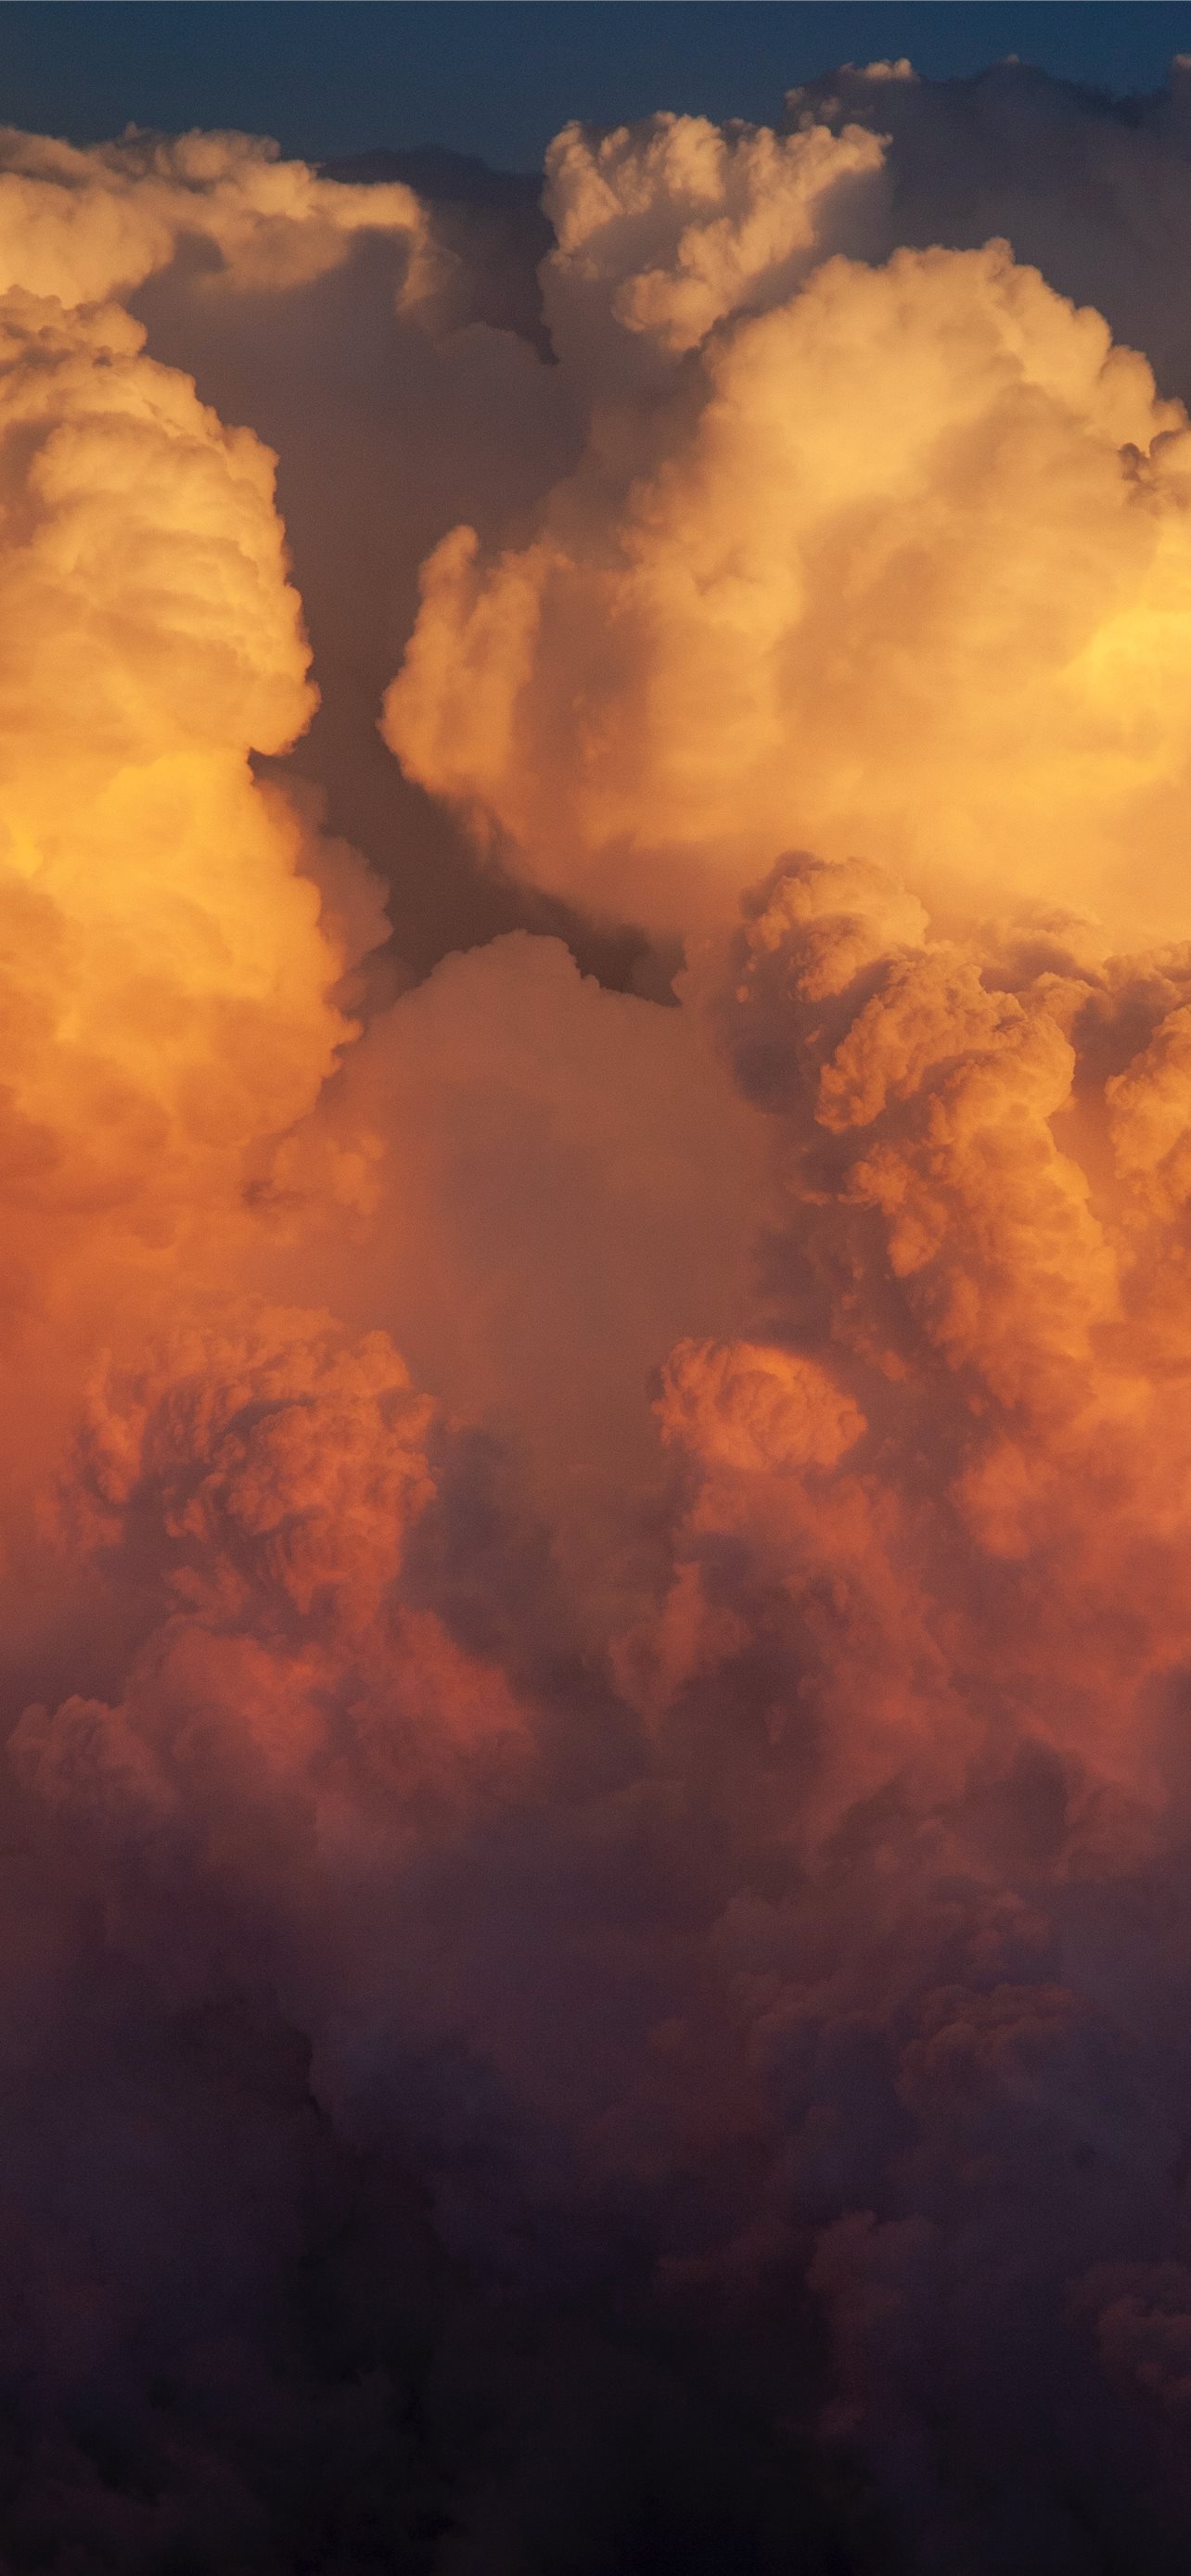 Yellow Cloud Iphone Wallpapers